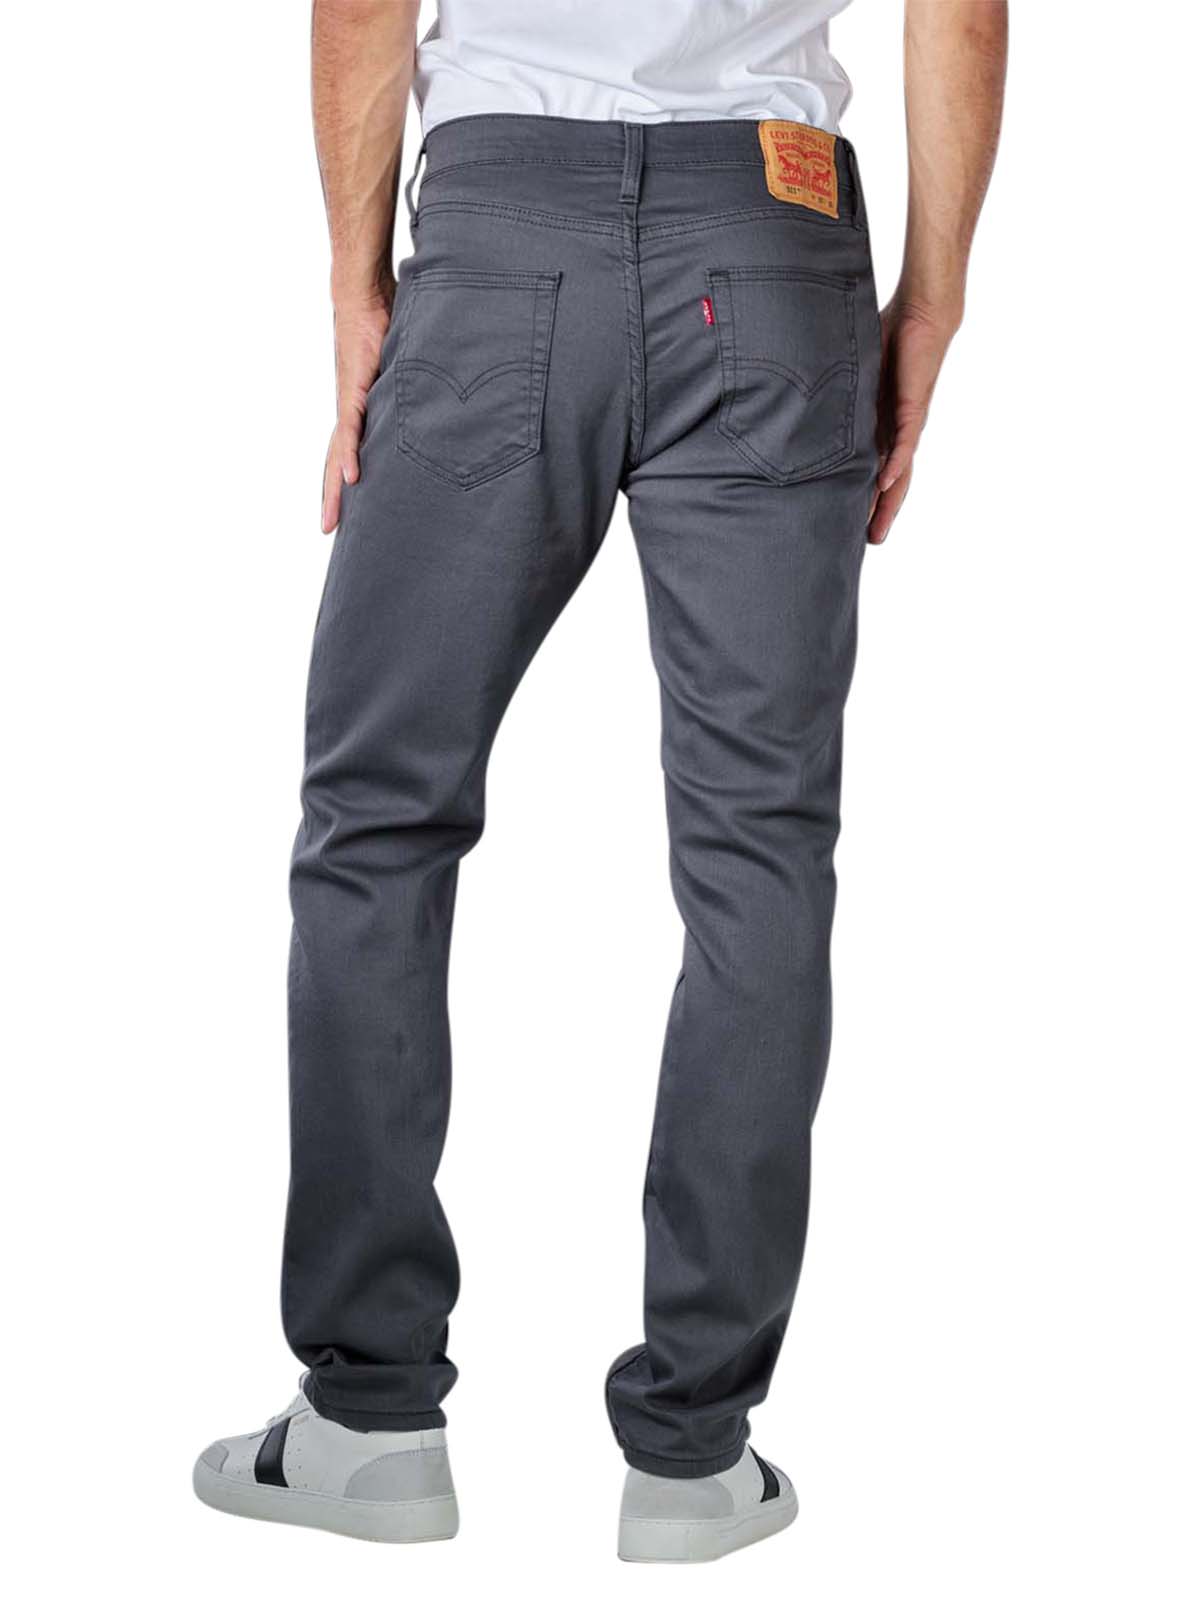 Levi's 511 Jeans Slim Fit grey / black 3d Levi's Men's Jeans | Free  Shipping on  - SIMPLY LOOK GOOD